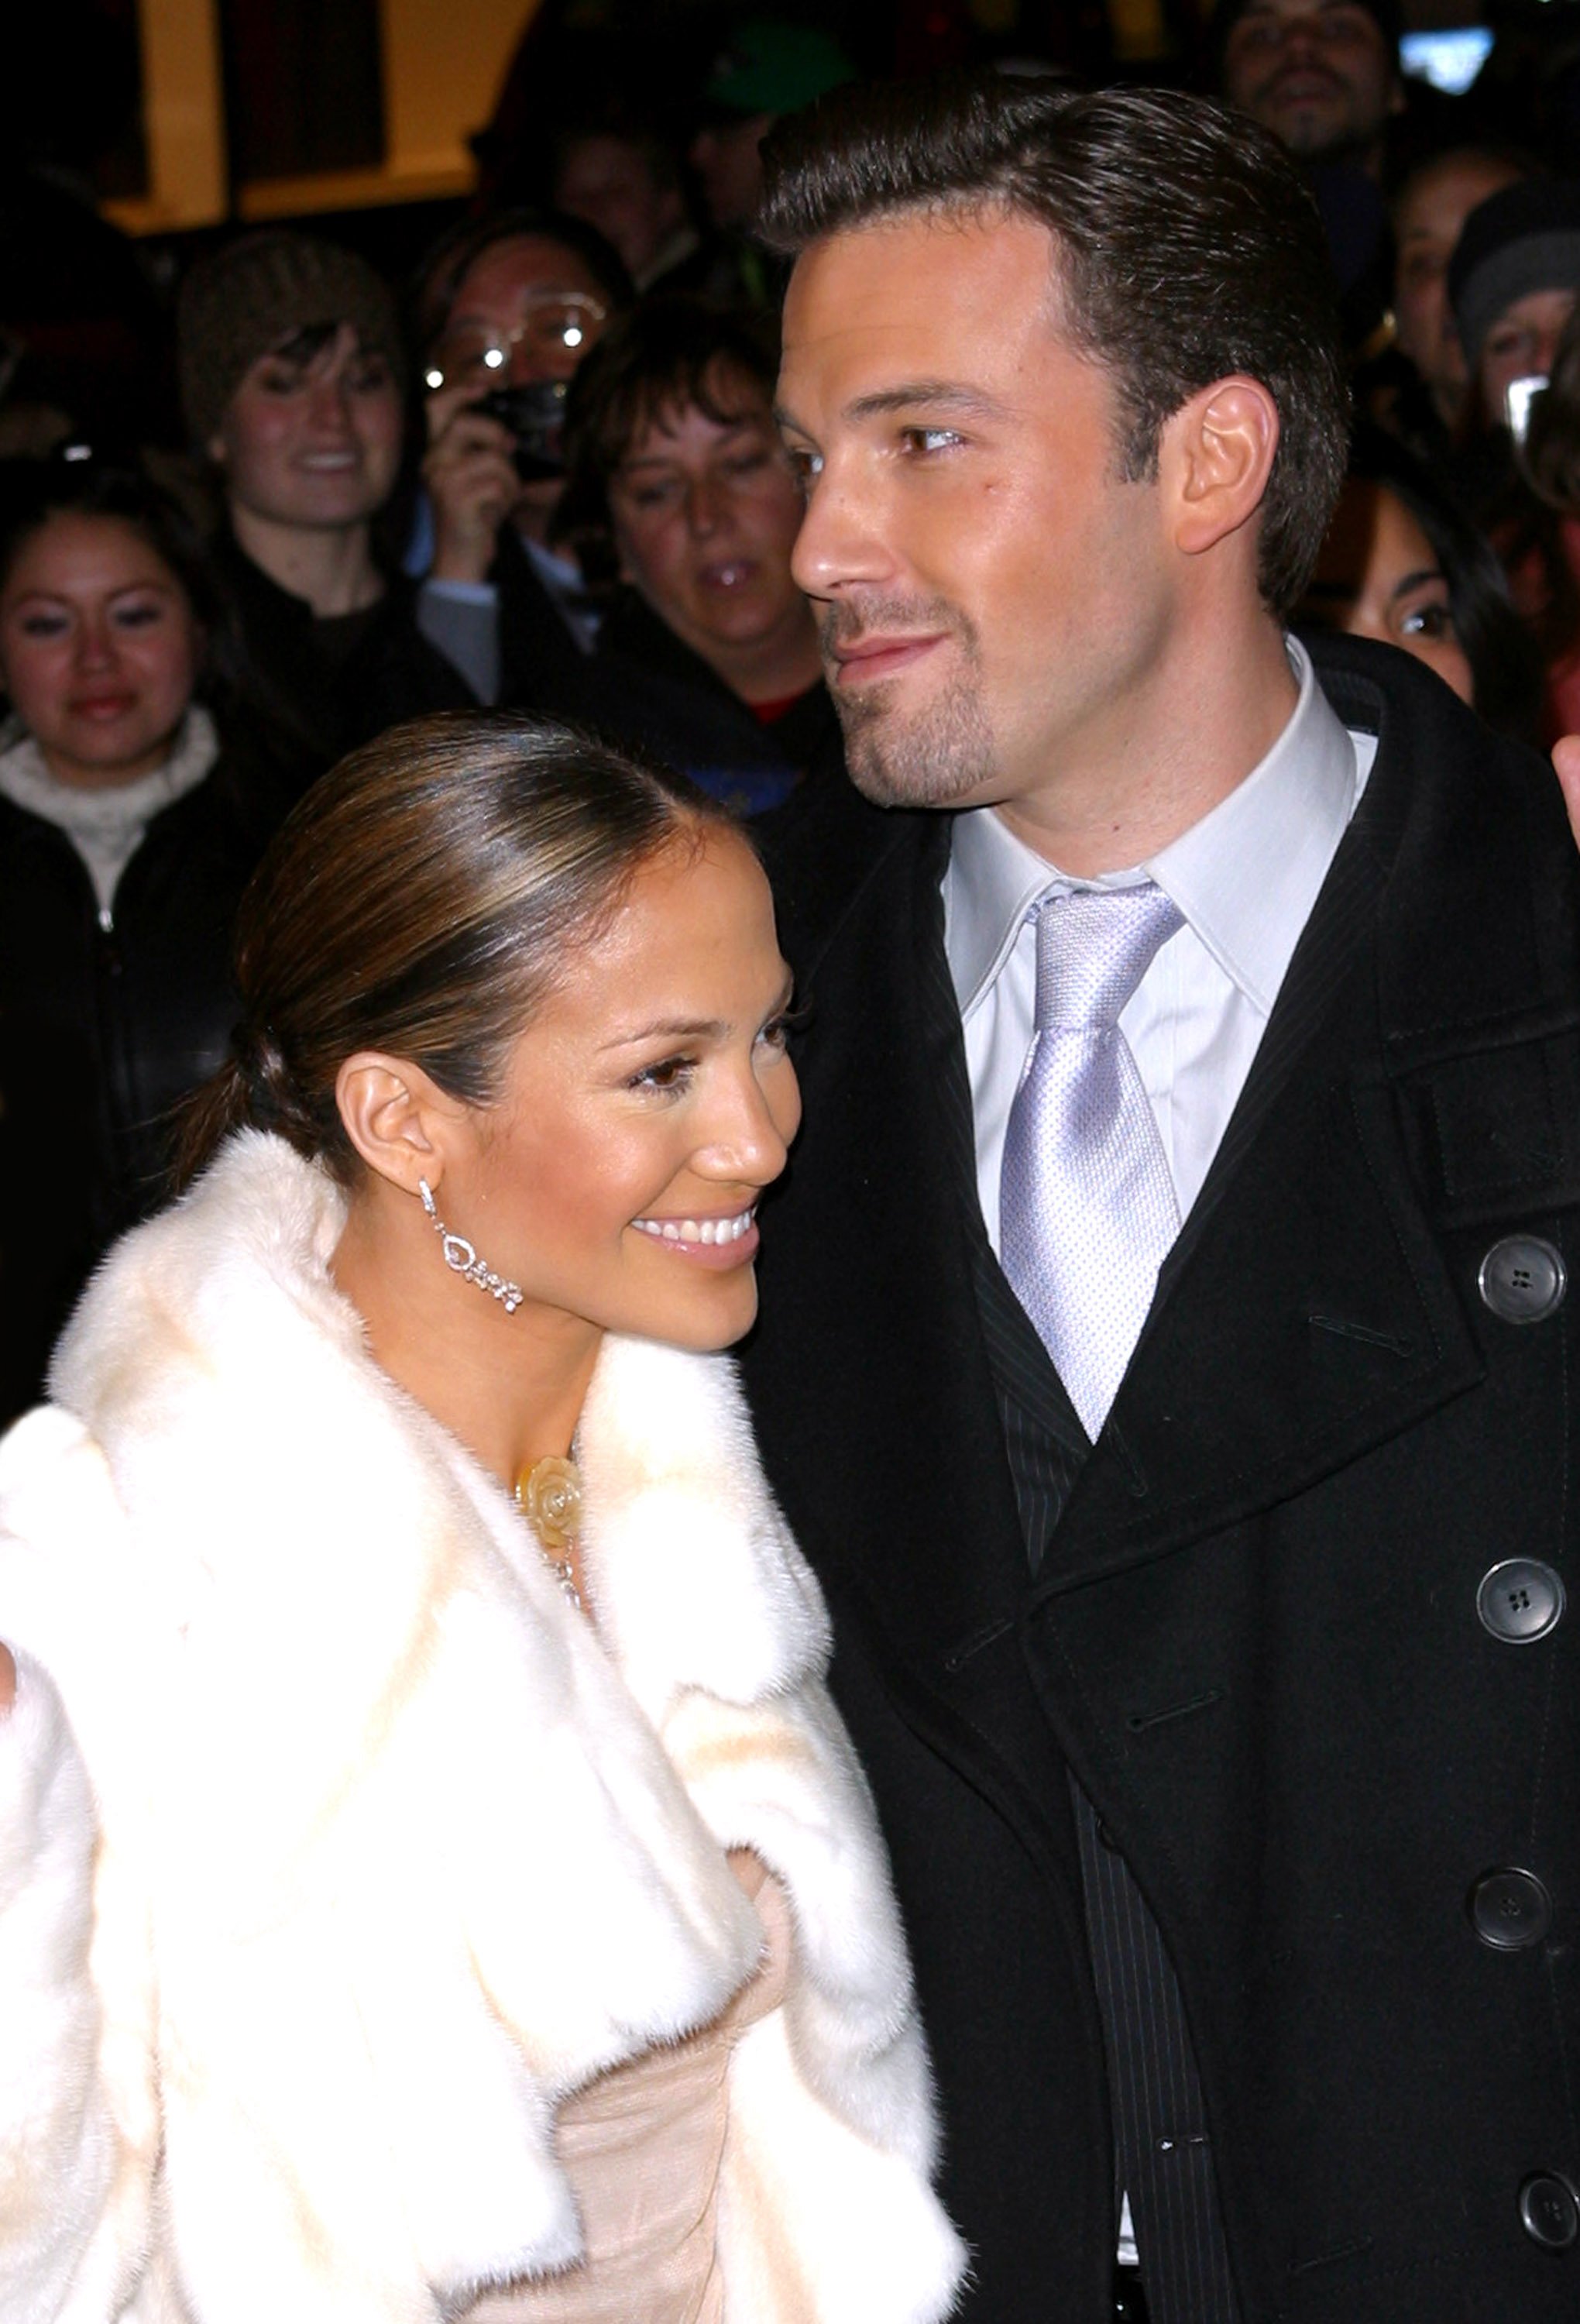 Jennifer Lopez and actor Ben Affleck during "Maid in Manhattan" premiere at The Rainbow Room in New York City, New York. | Source: Getty Images